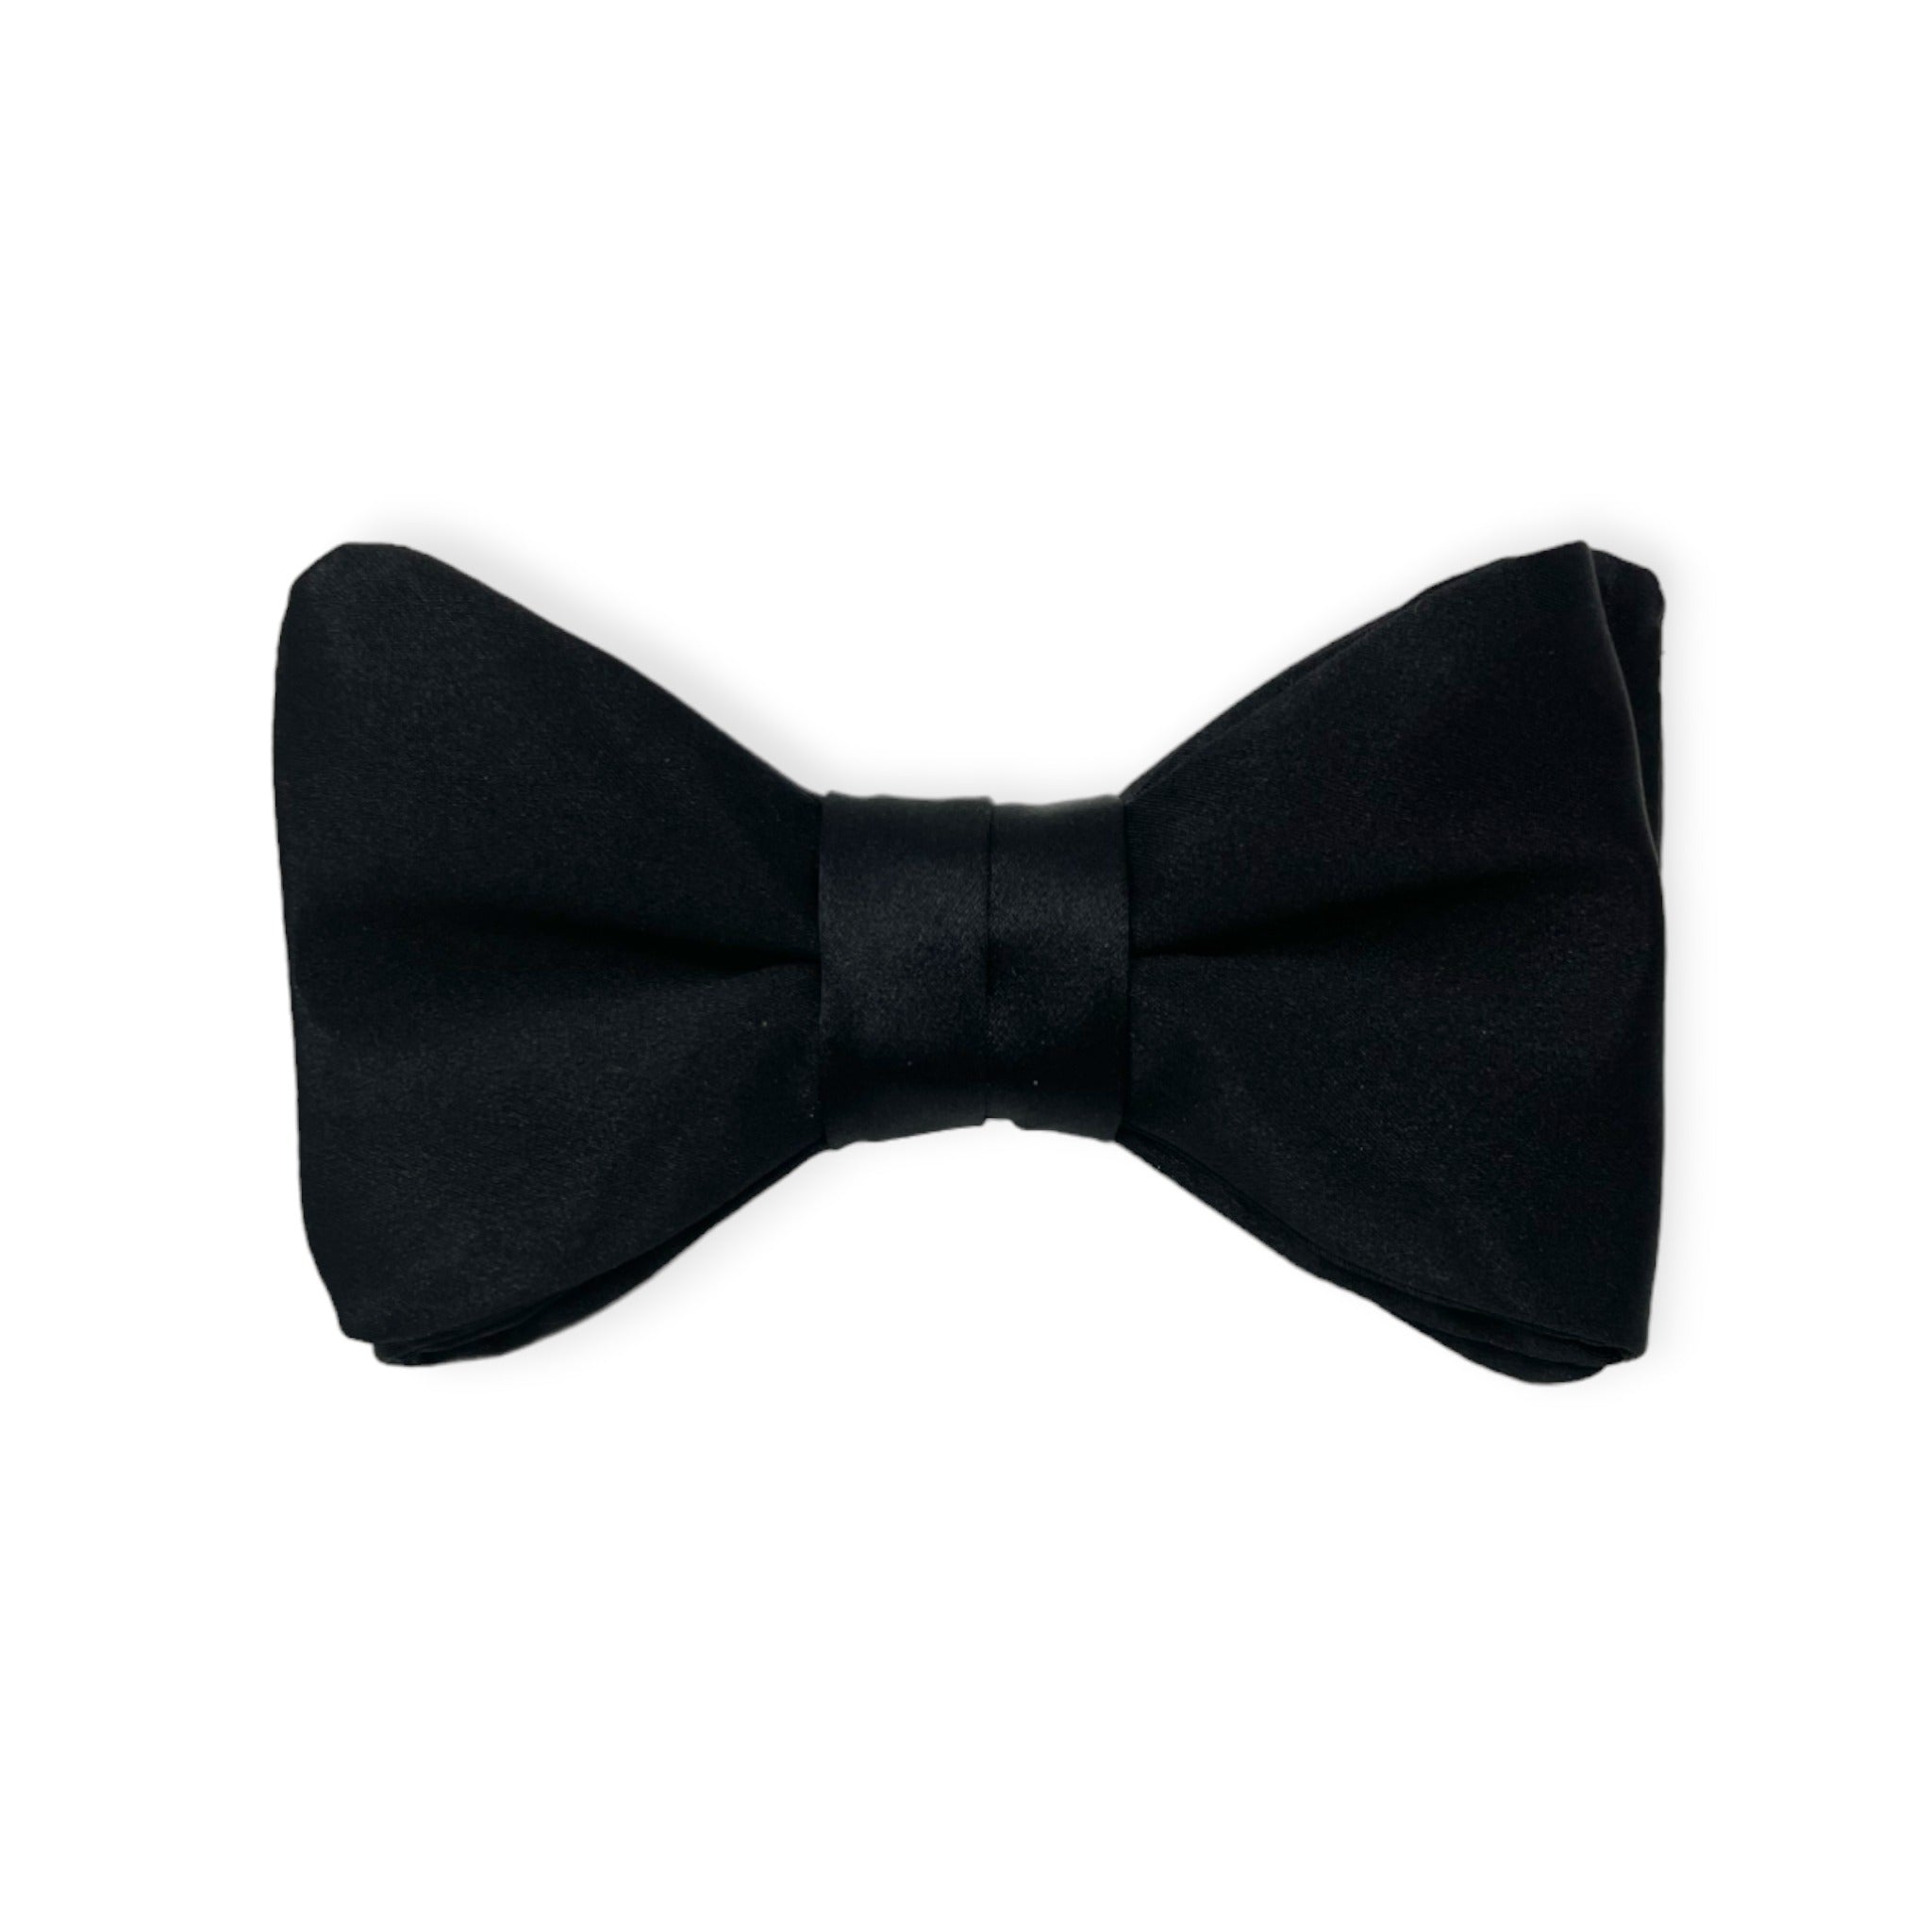 Top down view of Dion bow tie